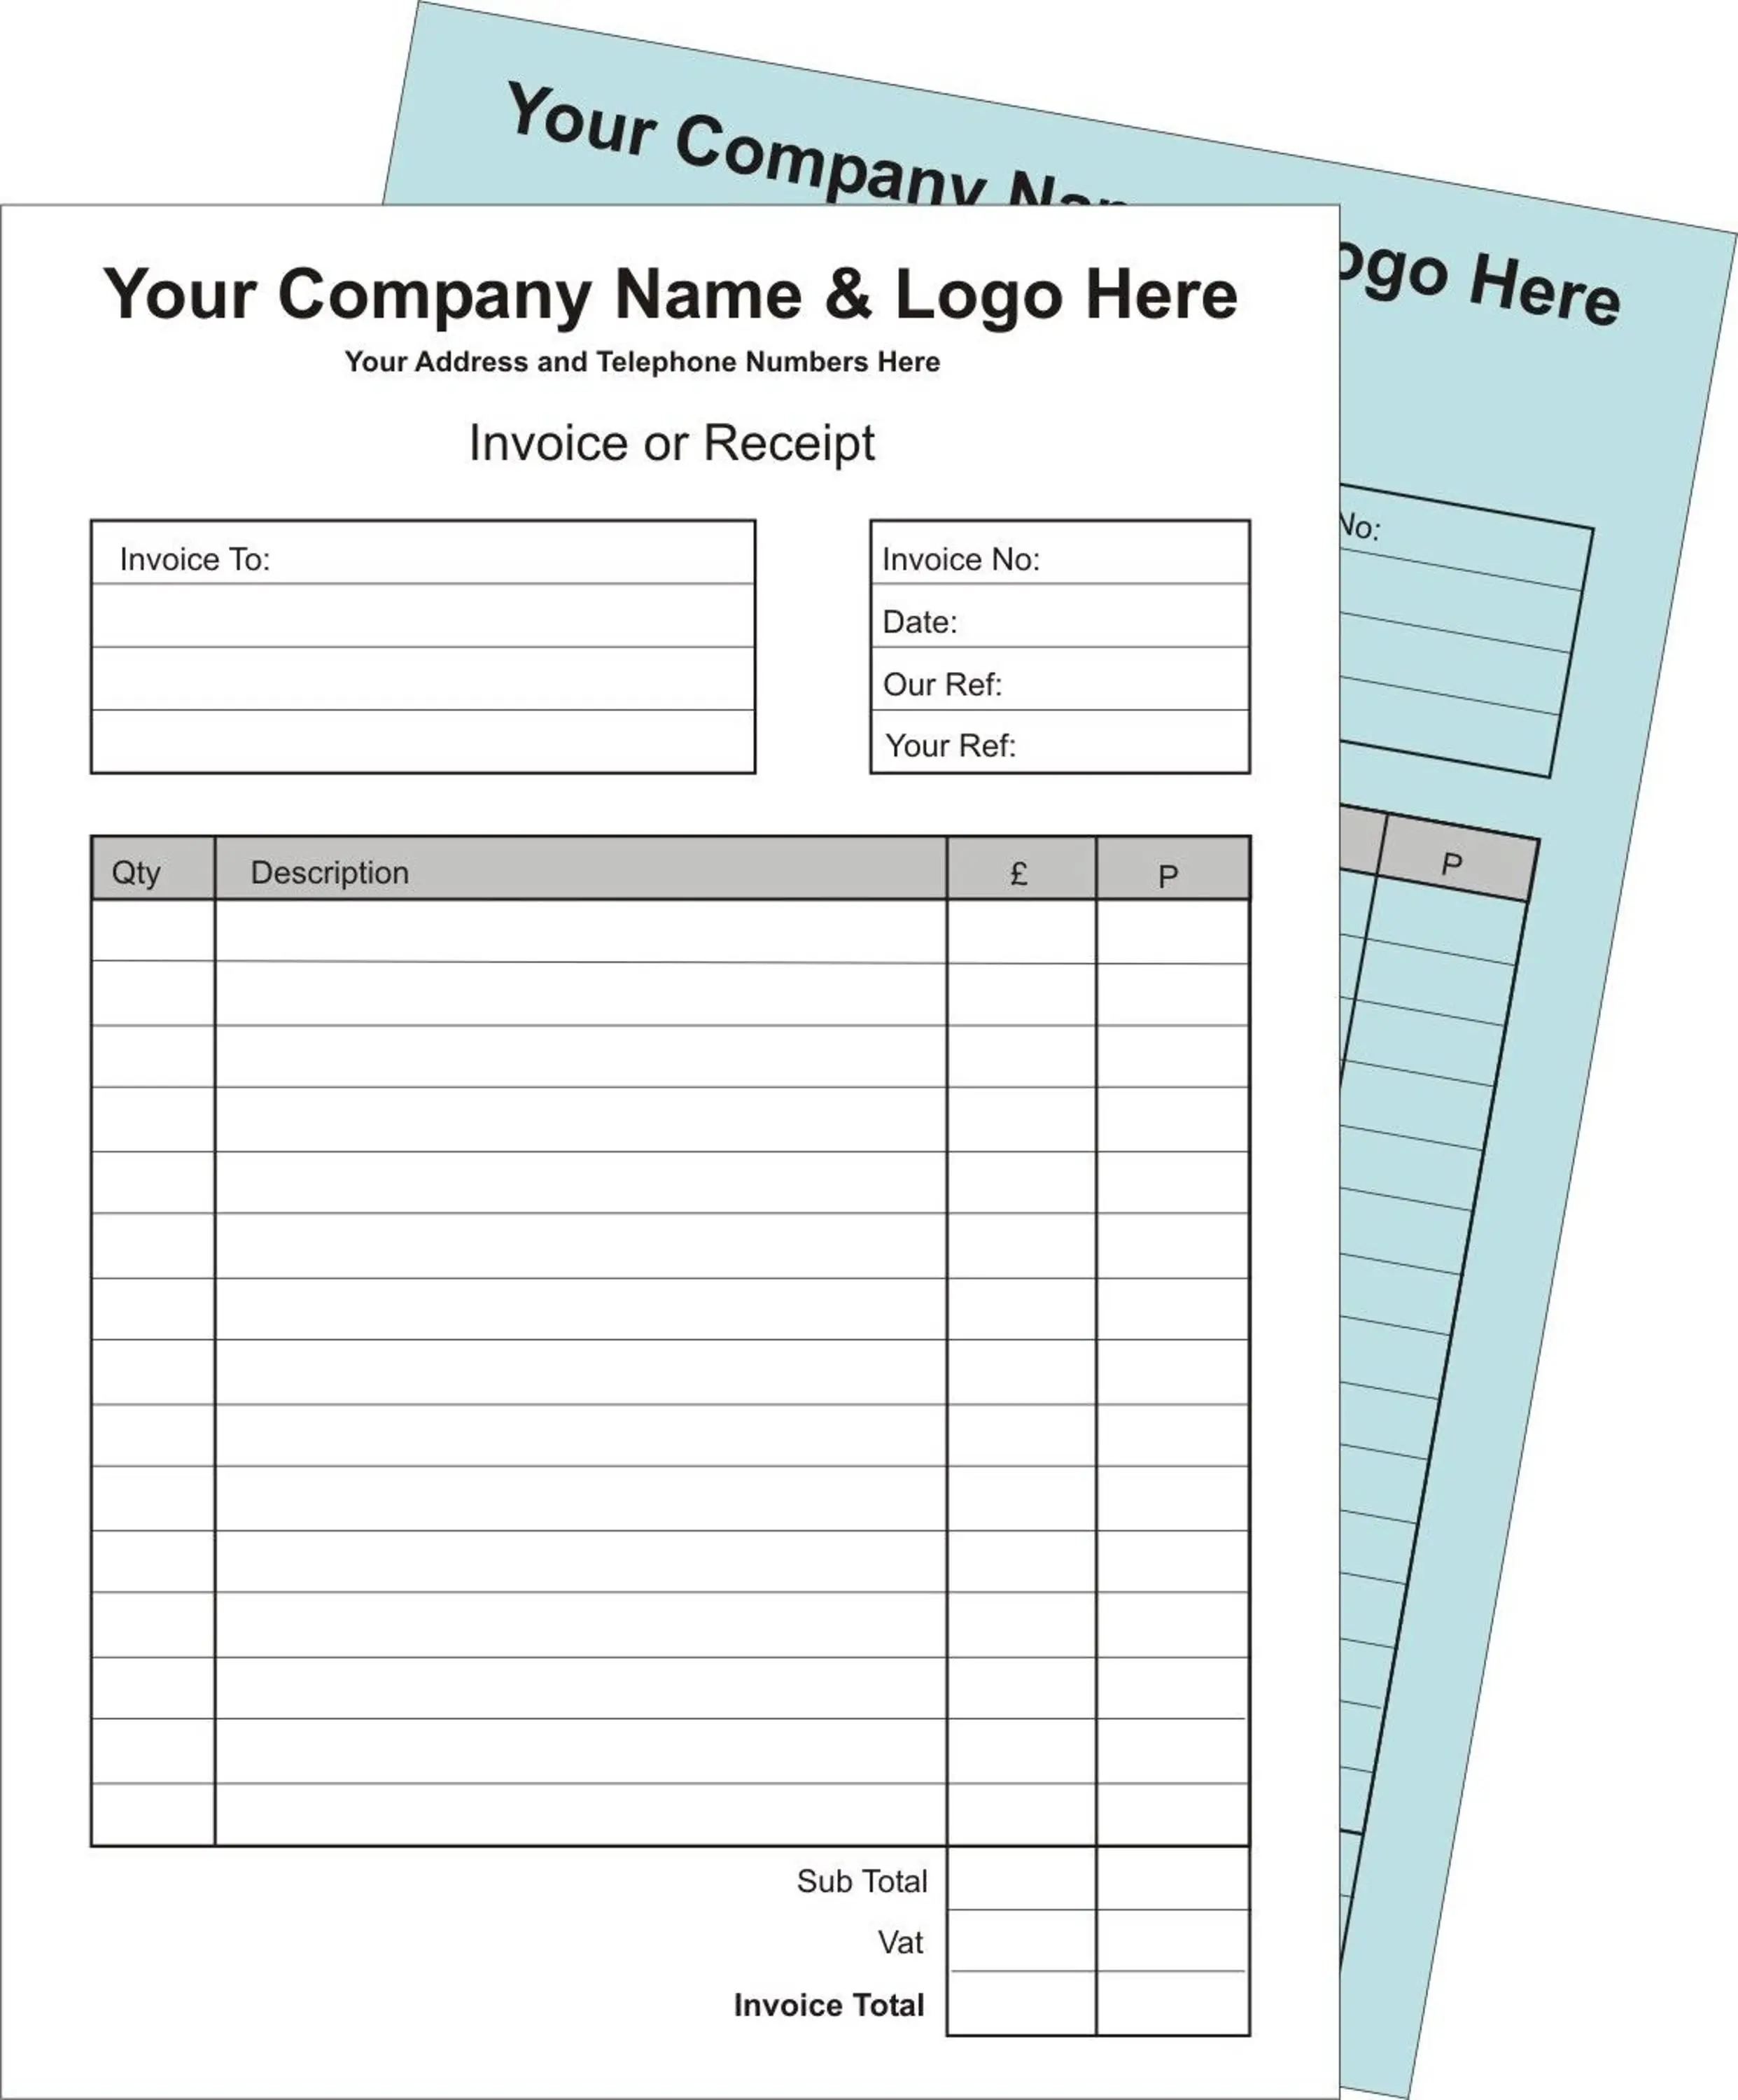 RECEIPT/ ORDER BOOKS PRINT PERSONALISED DUPLICATE A5 INVOICE PADS NCR 